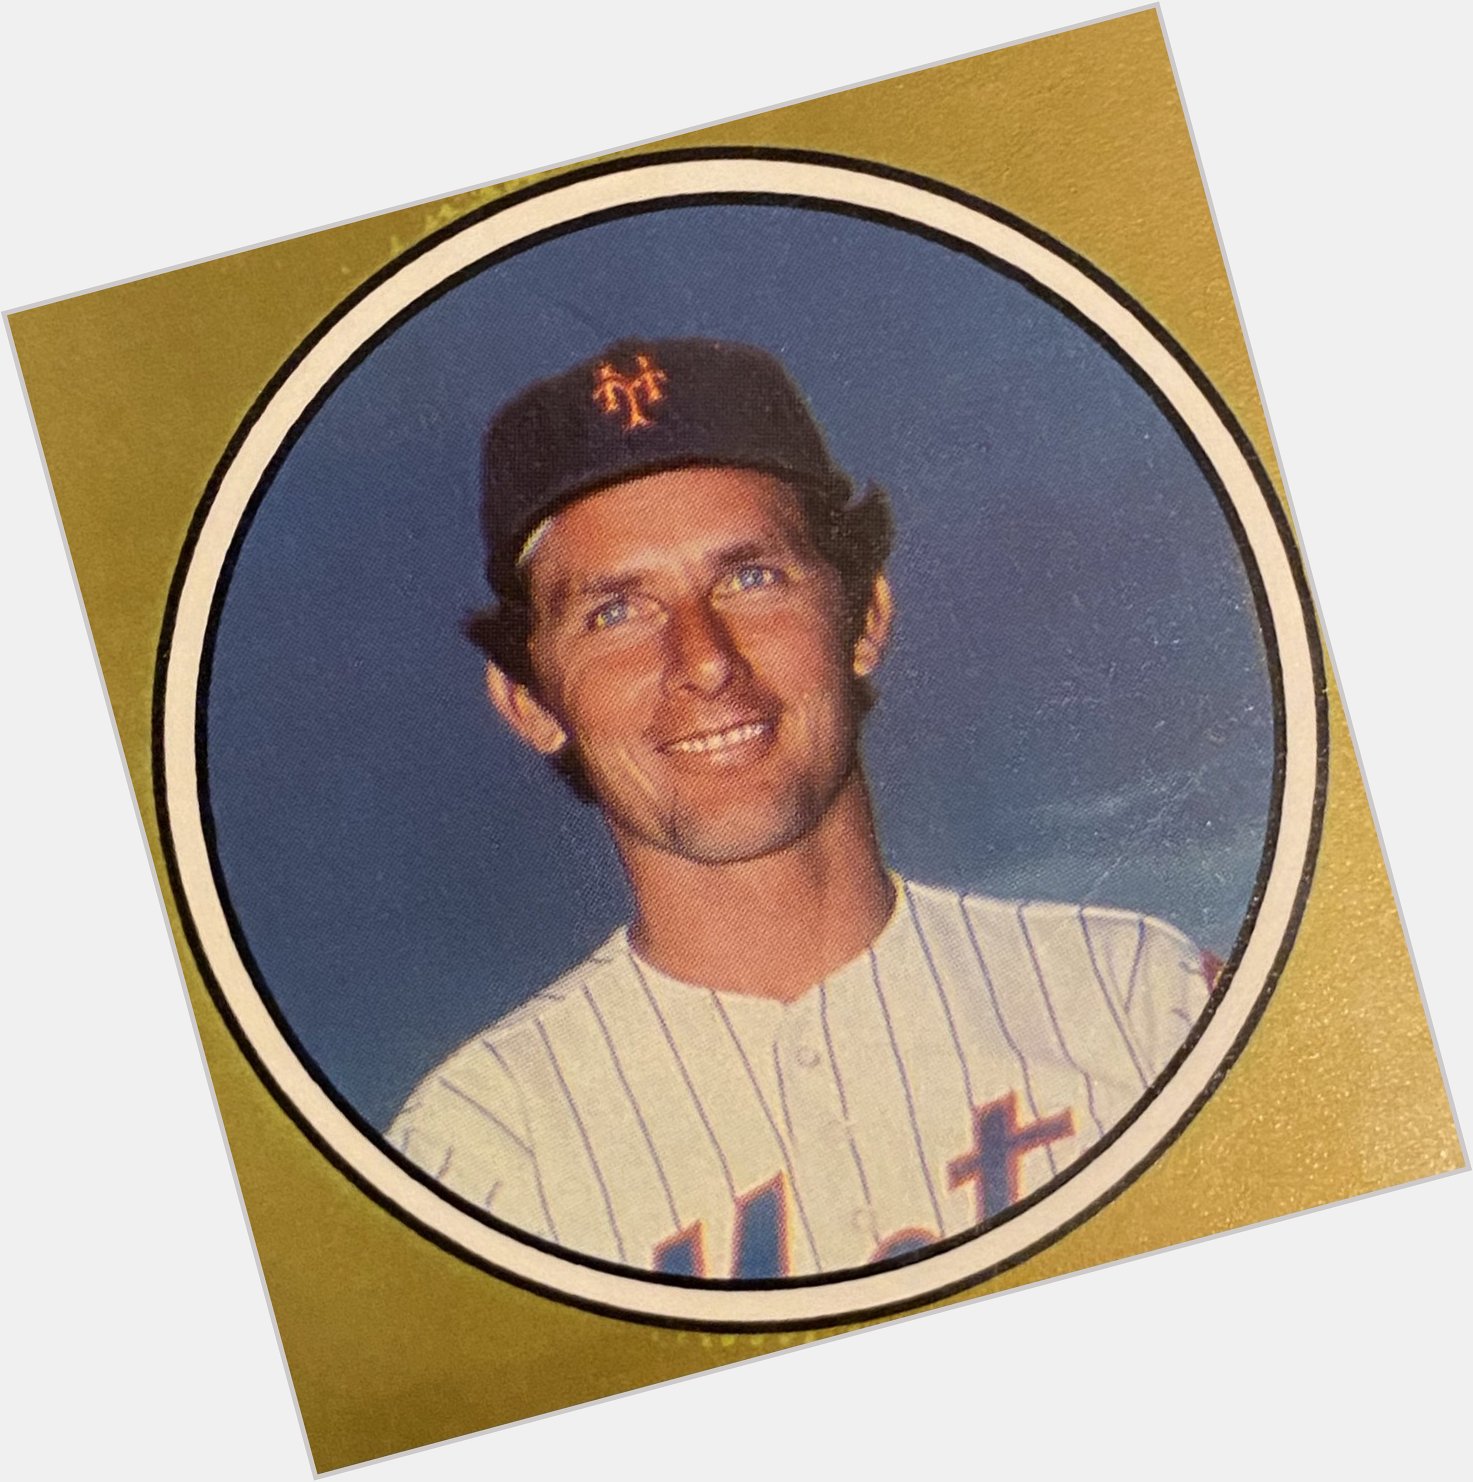 Happy Birthday to Mets player, coach and manager BUD HARRELSON!!     